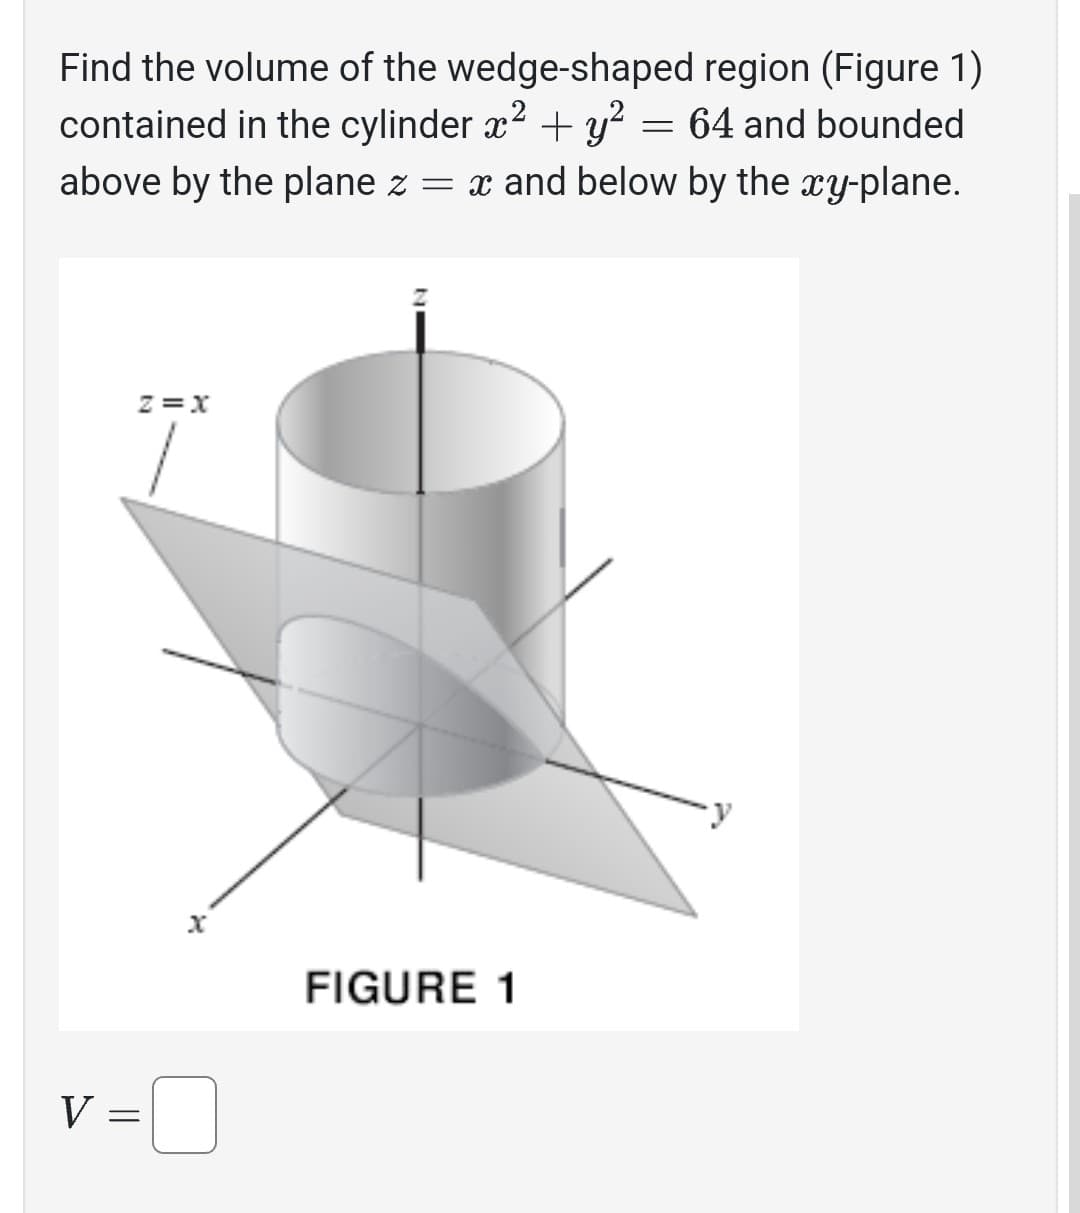 Find the volume of the wedge-shaped region (Figure 1)
contained in the cylinder x² + y² = 64 and bounded
above by the plane z = x and below by the xy-plane.
V
Z=X
1
||
=
X
FIGURE 1
y